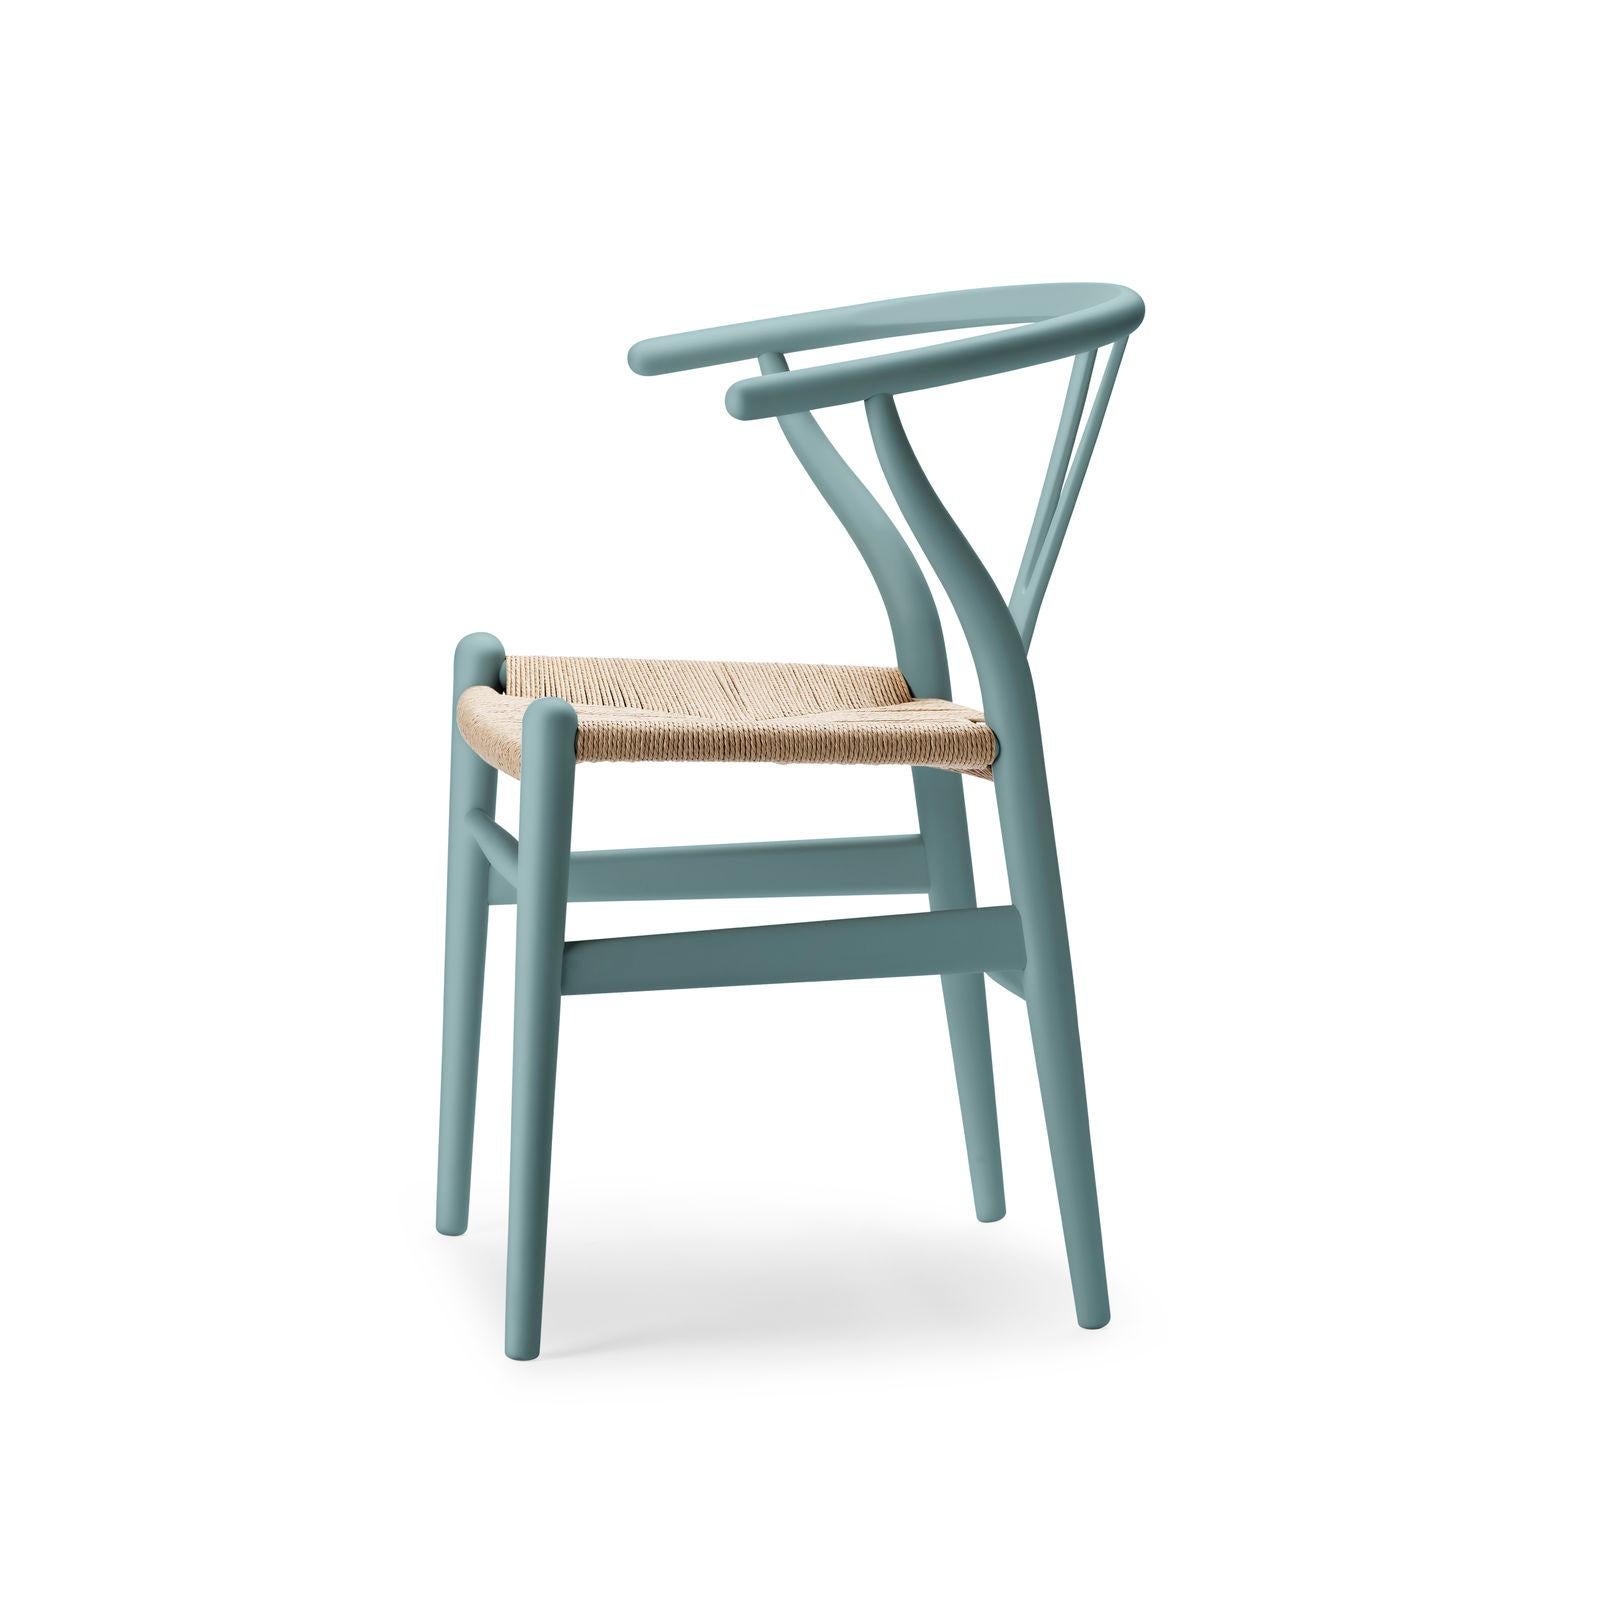 The Wishbone chair is now available in nine new colors by Ilse Crawford. To celebrate Hans J. Wegner’s more than 70 years of collaboration with Carl Hansen & Son, the company is 
now expanding its collaboration with London-based designer Ilse